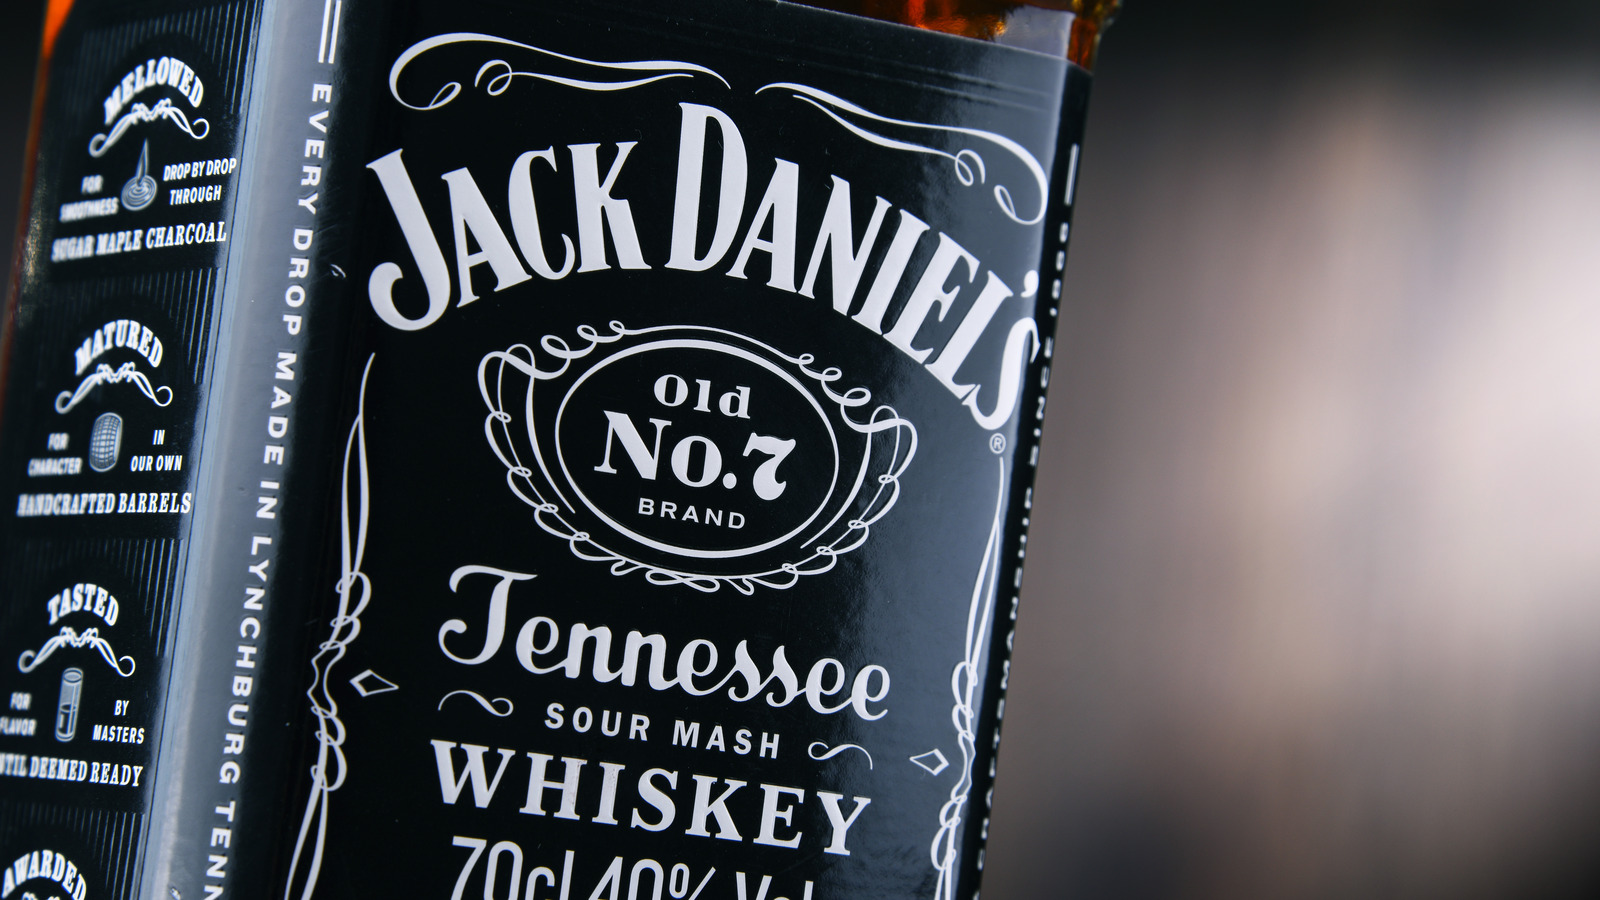 https://www.mashed.com/img/gallery/jack-daniels-whiskey-bottles-ranked-from-worst-to-best/l-intro-1647532263.jpg